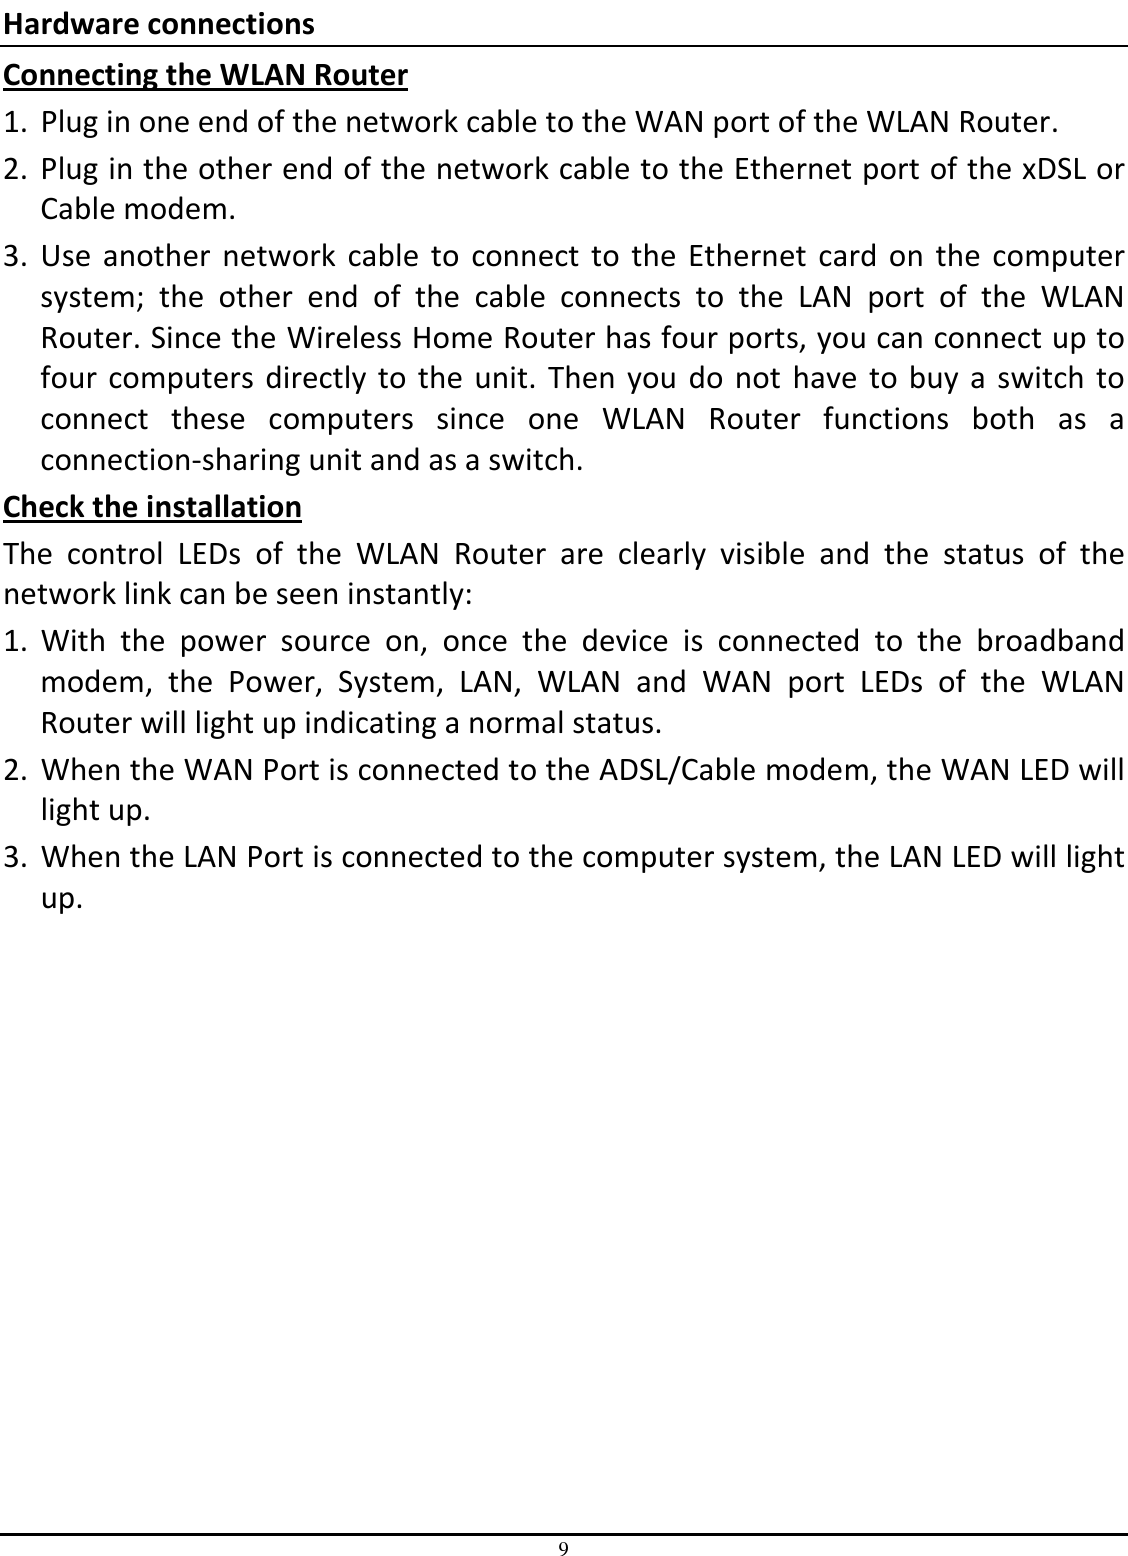 9 Hardware connections Connecting the WLAN Router 1. Plug in one end of the network cable to the WAN port of the WLAN Router. 2. Plug in the other end of the network cable to the Ethernet port of the xDSL or Cable modem. 3. Use  another  network  cable  to  connect  to  the  Ethernet  card  on  the  computer system;  the  other  end  of  the  cable  connects  to  the  LAN  port  of  the  WLAN Router. Since the Wireless Home Router has four ports, you can connect up to four  computers  directly  to the  unit.  Then  you  do not  have  to buy  a  switch  to connect  these  computers  since  one  WLAN  Router  functions  both  as  a connection-sharing unit and as a switch. Check the installation The  control  LEDs  of  the  WLAN  Router  are  clearly  visible  and  the  status  of  the network link can be seen instantly: 1. With  the  power  source  on,  once  the  device  is  connected  to  the  broadband modem,  the  Power,  System,  LAN,  WLAN  and  WAN  port  LEDs  of  the  WLAN Router will light up indicating a normal status. 2. When the WAN Port is connected to the ADSL/Cable modem, the WAN LED will light up. 3. When the LAN Port is connected to the computer system, the LAN LED will light up. 